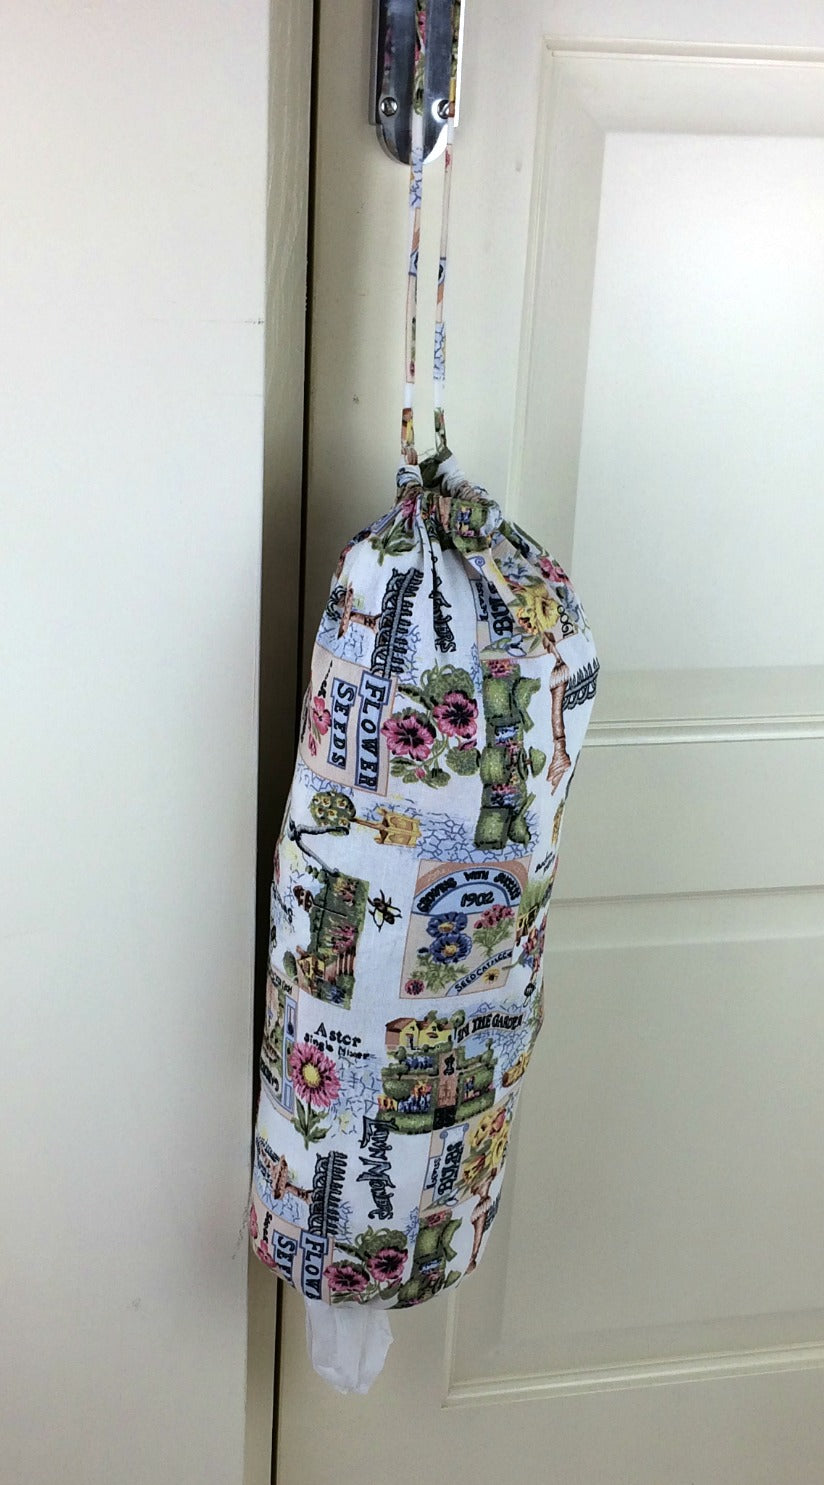 plastic bag dispenser and holder for those pesky bags for life that take over this one is green gardening theme